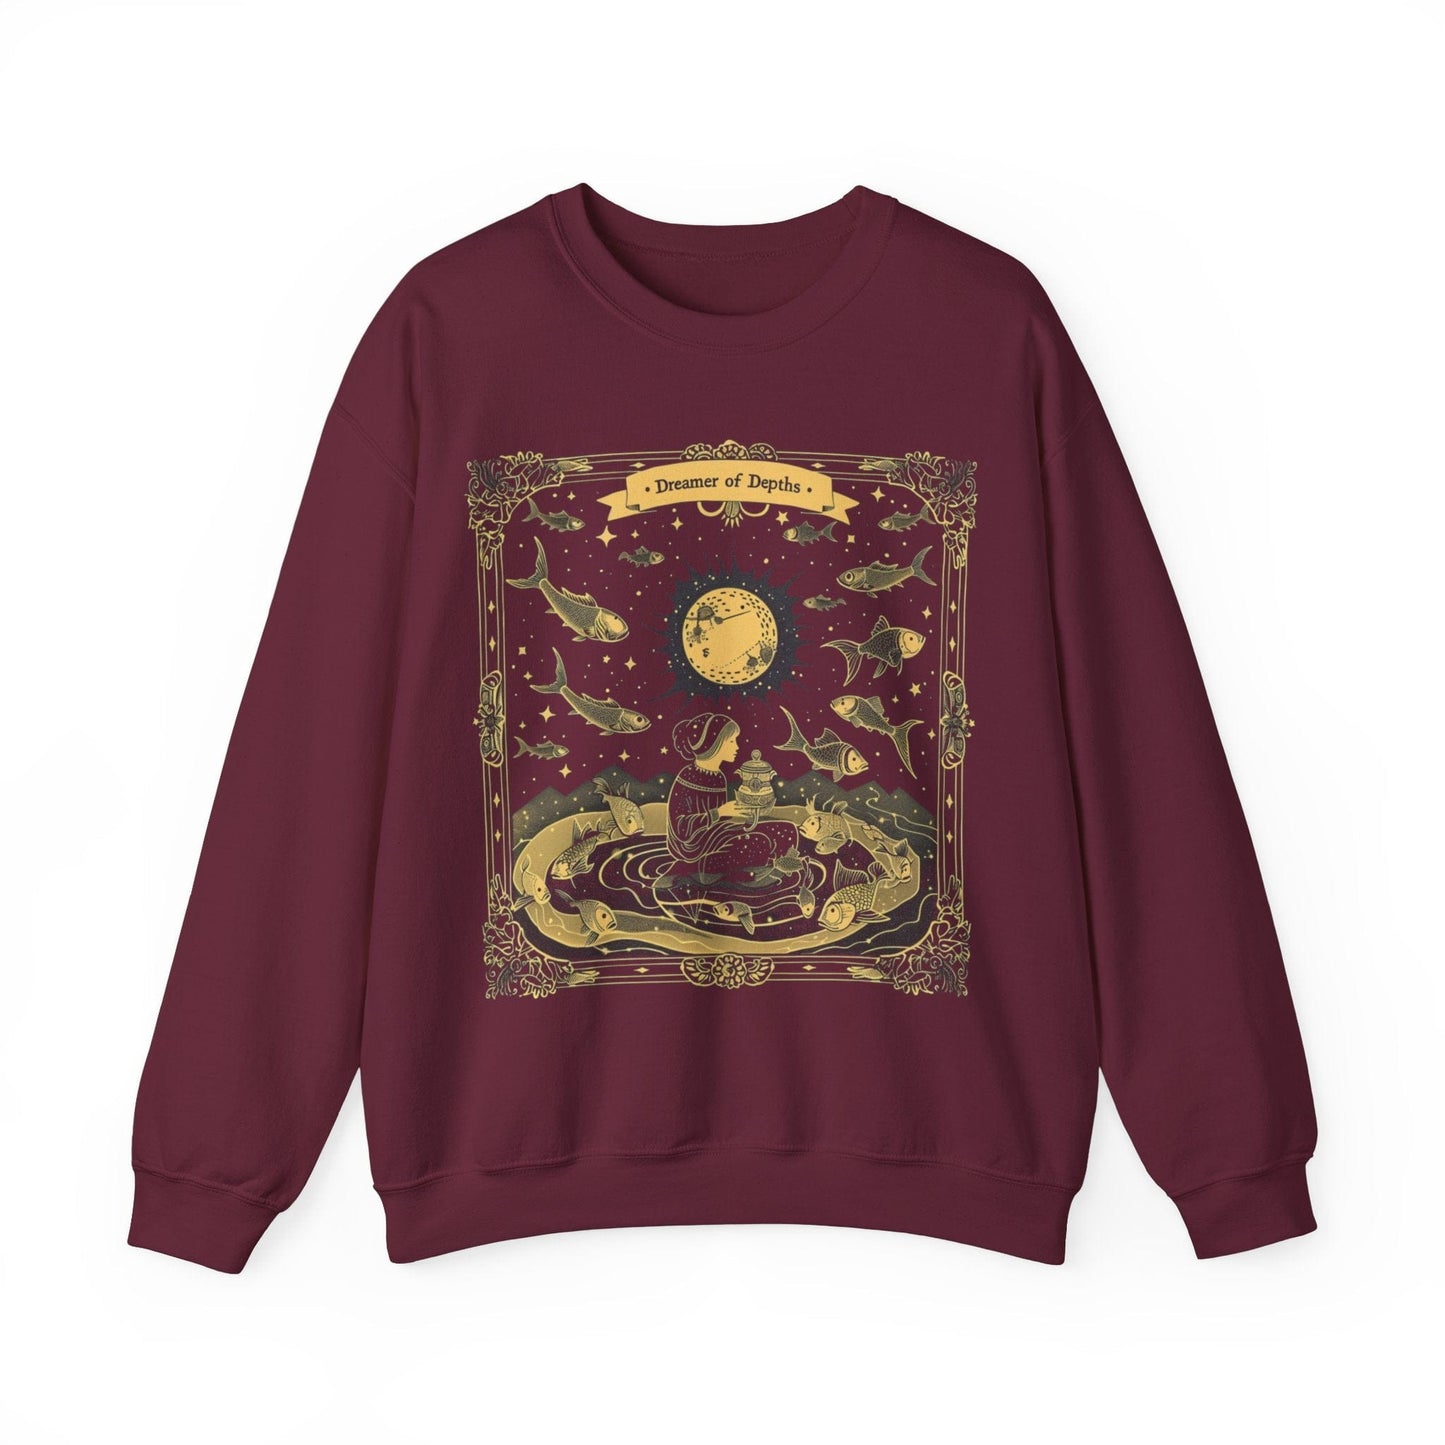 Sweatshirt S / Maroon The Dreamer of the Depths Soft Pisces Sweater